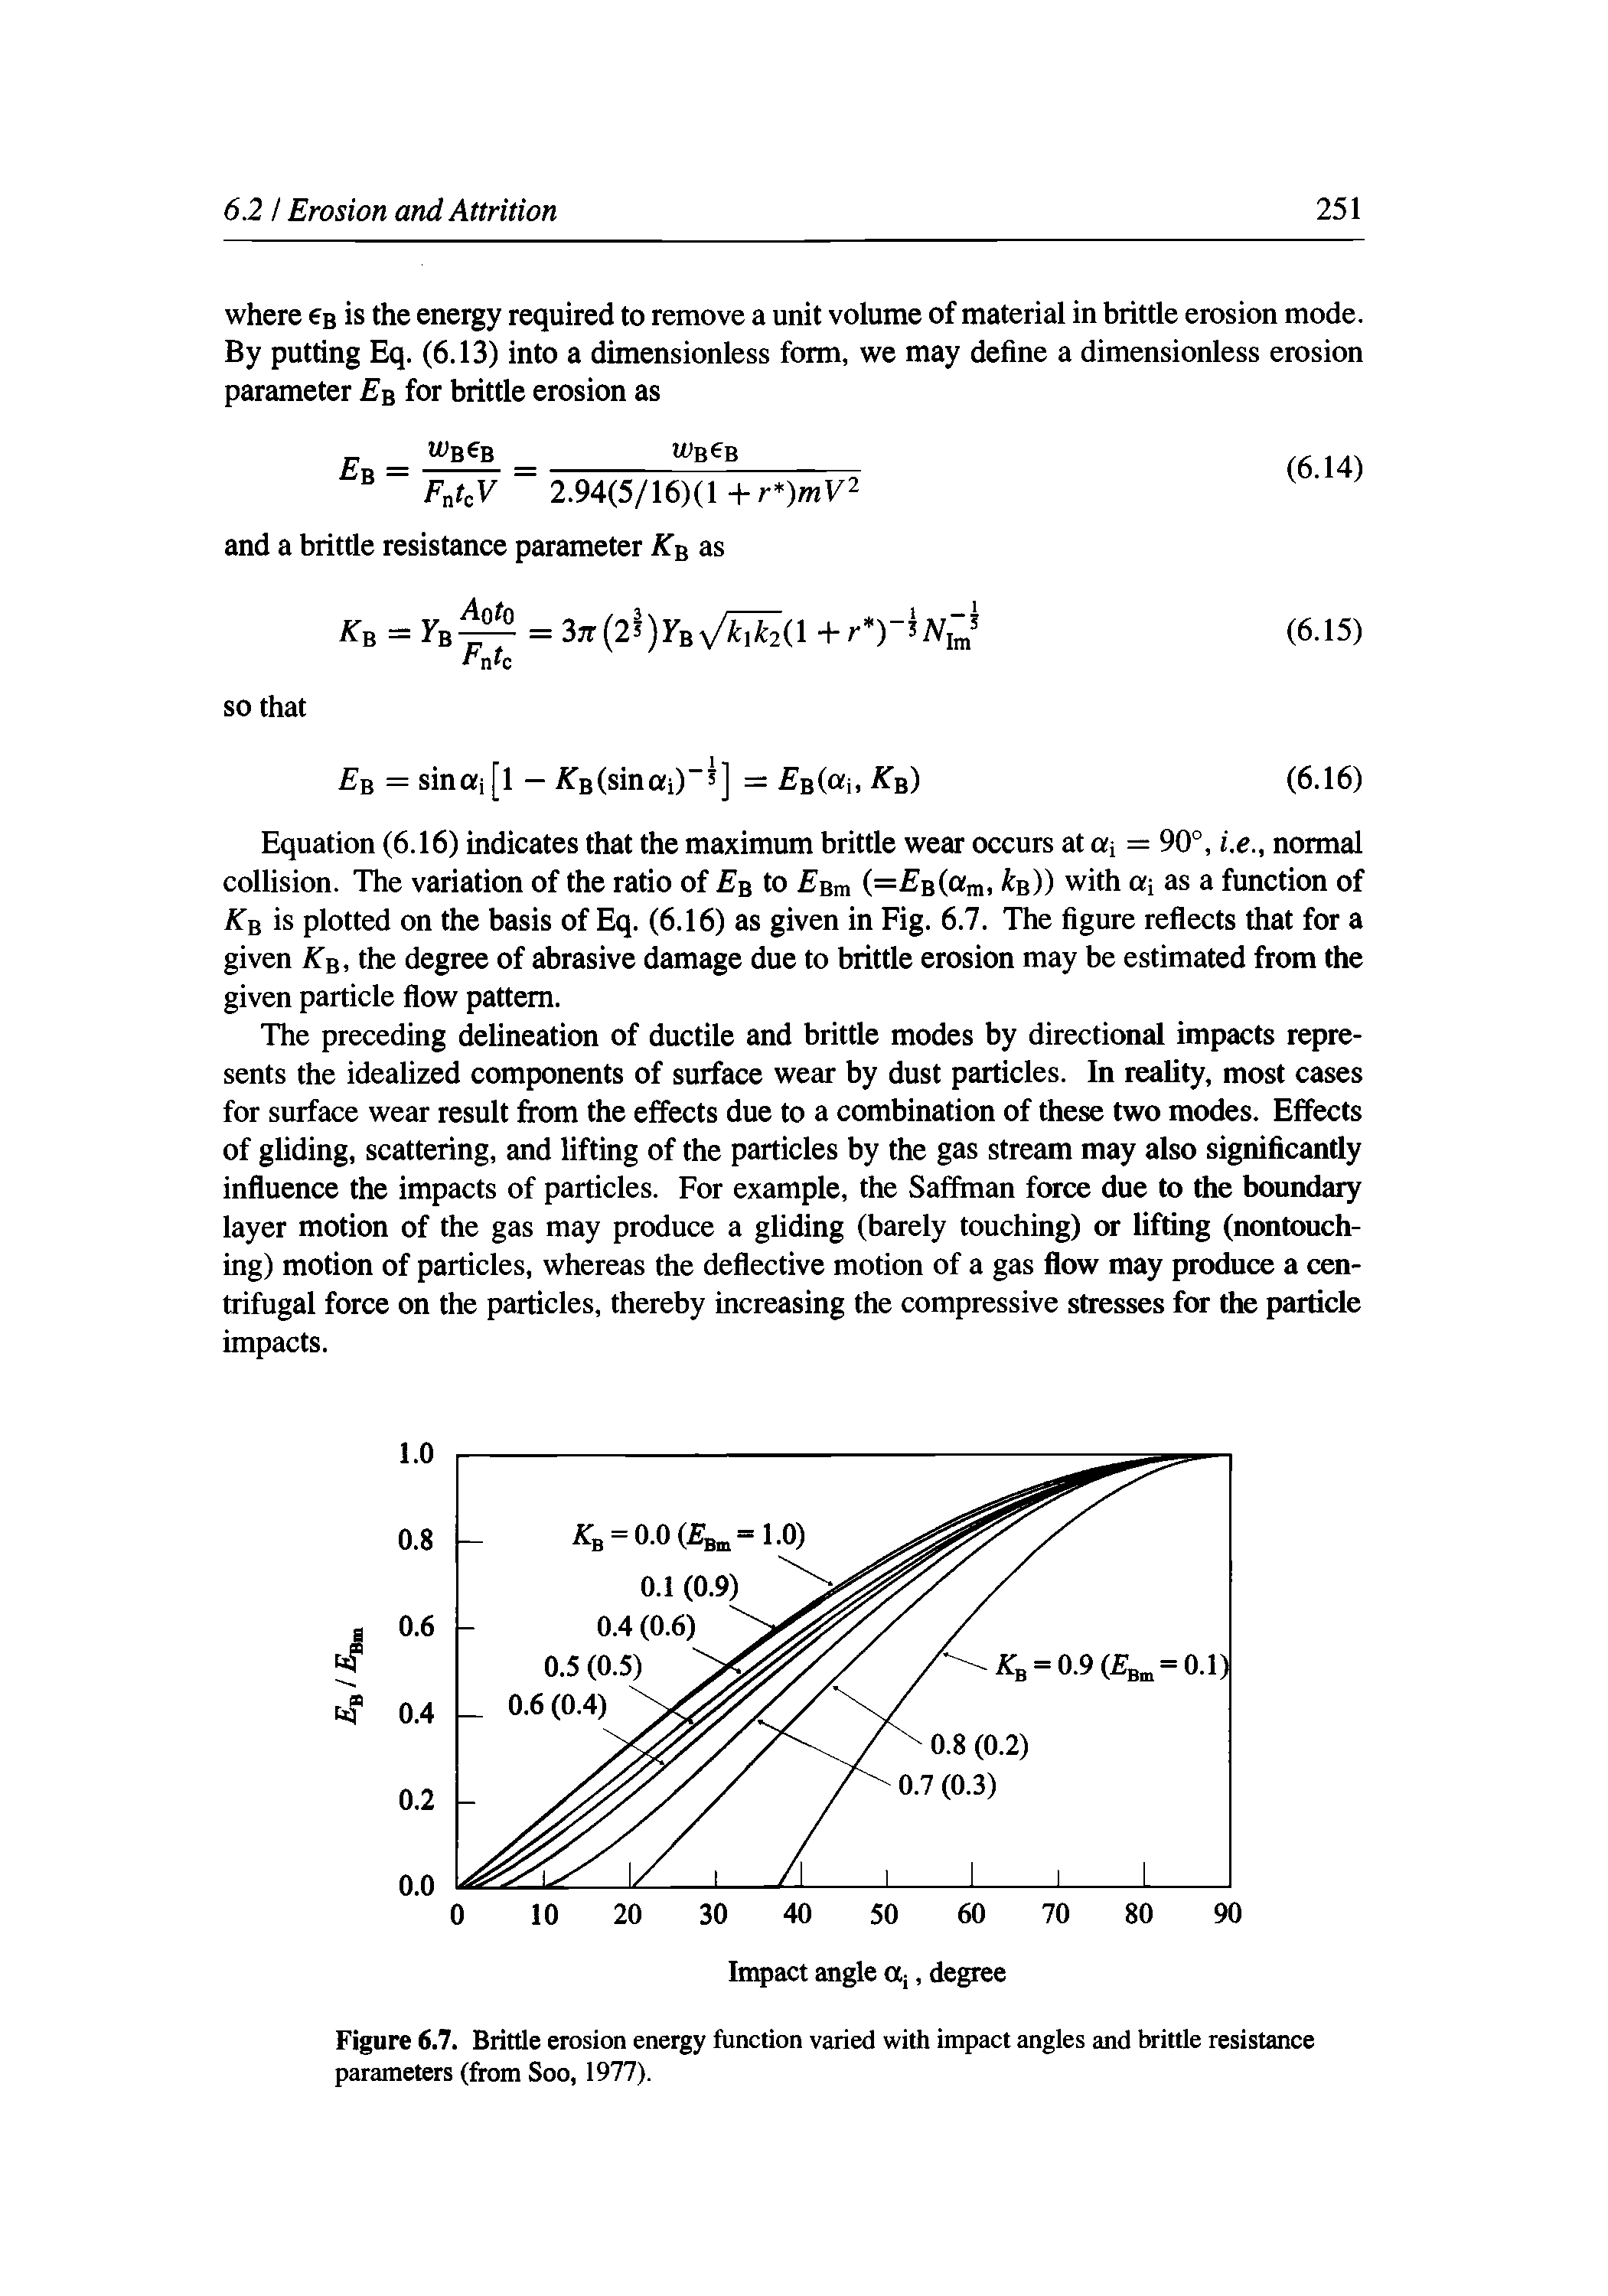 Figure 6.7. Brittle erosion energy function varied with impact angles and brittle resistance parameters (from Soo, 1977).